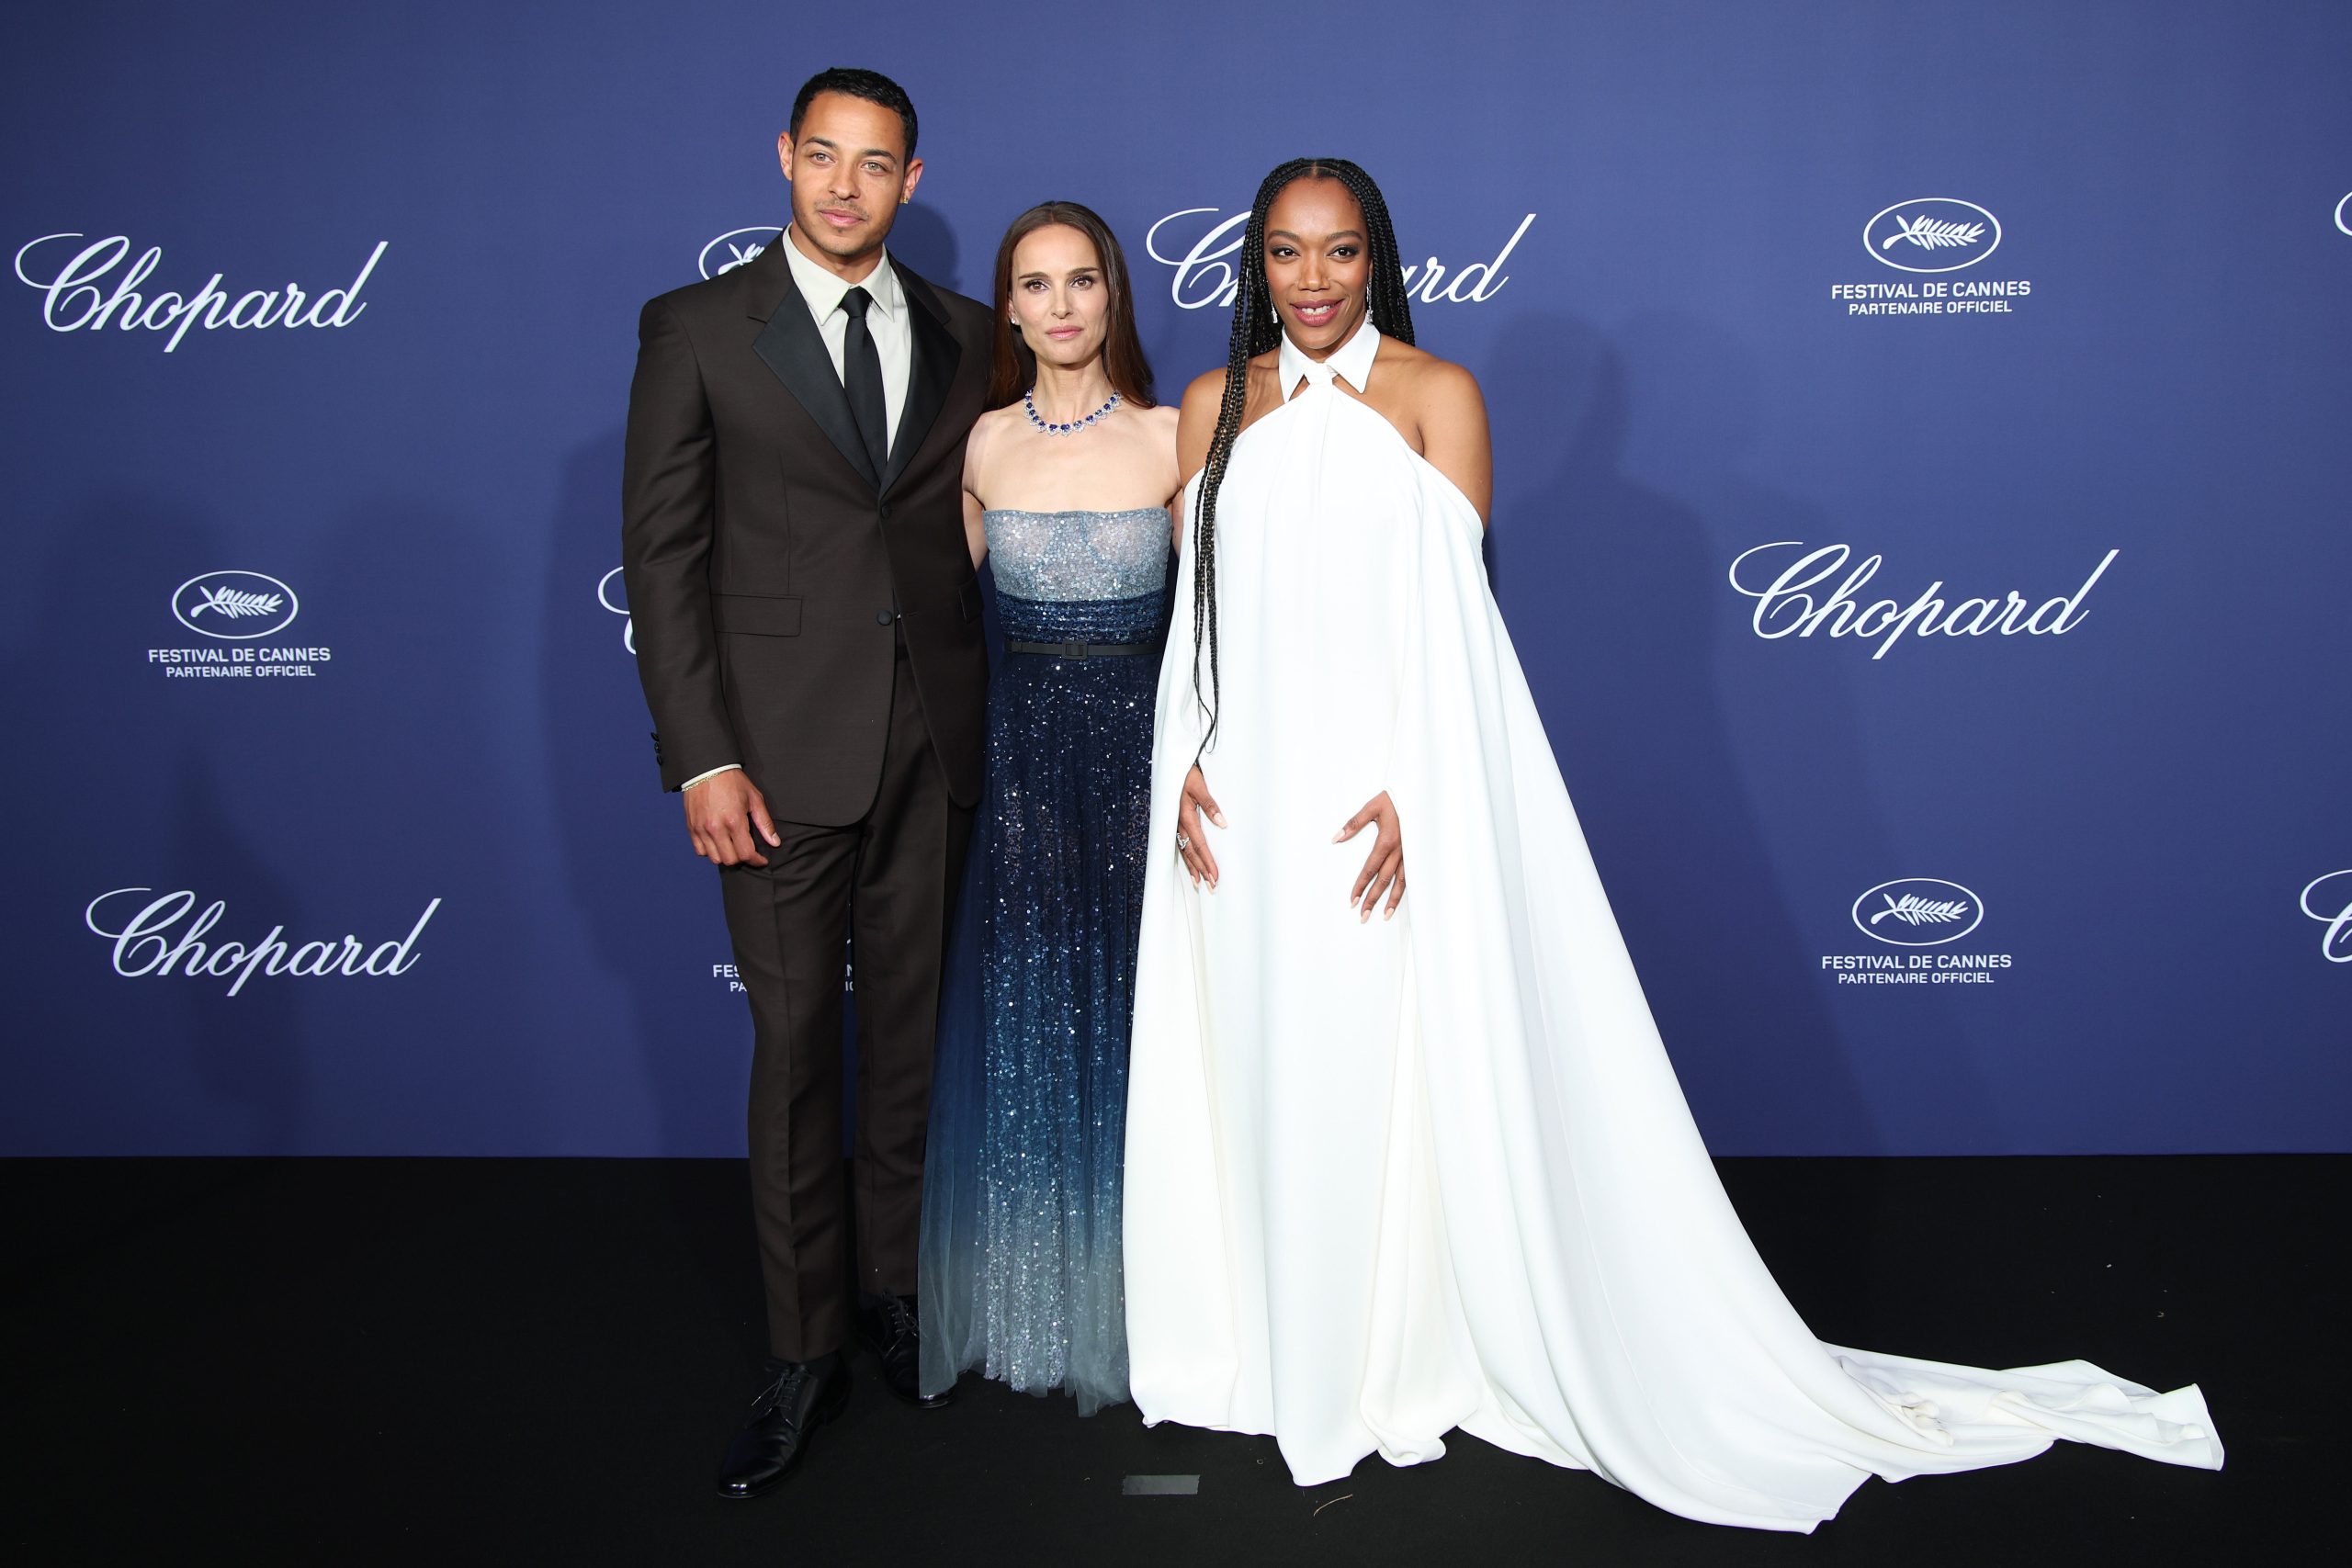 Natalie Portman Becomes the Godmother to Rising Stars at Chopard’s Annual Cannes Event